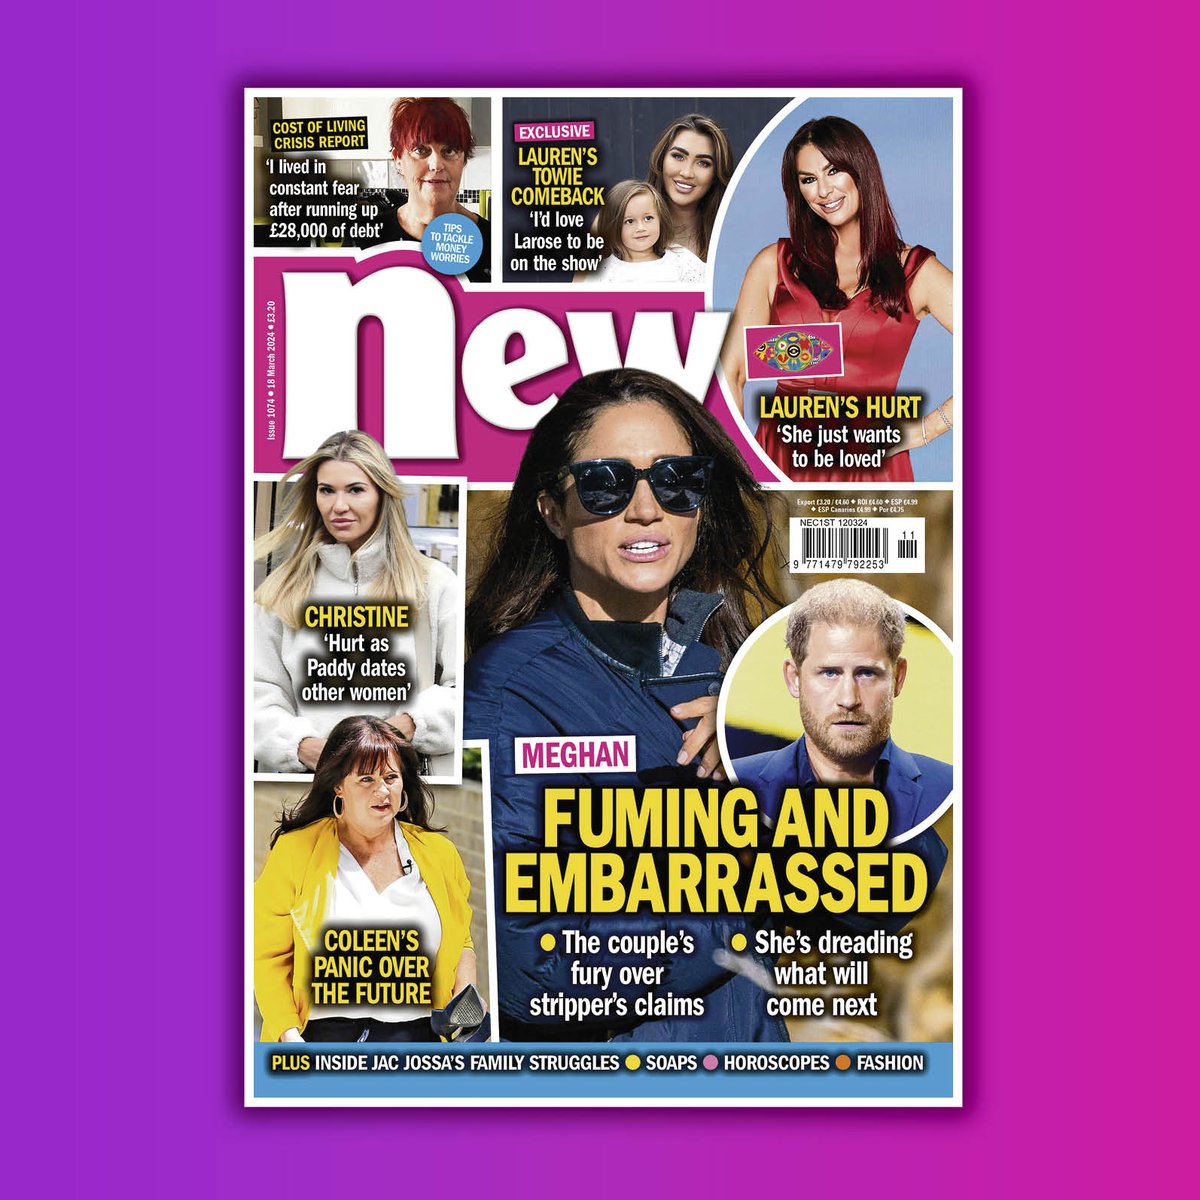 ✨ NEW ISSUE ALERT ✨ In this week's issue we've got Meghan fuming and embarrased. Plus Coleen's panic over the future and Lauren Goodger's TOWIE comeback. Out now. 💫💫💫